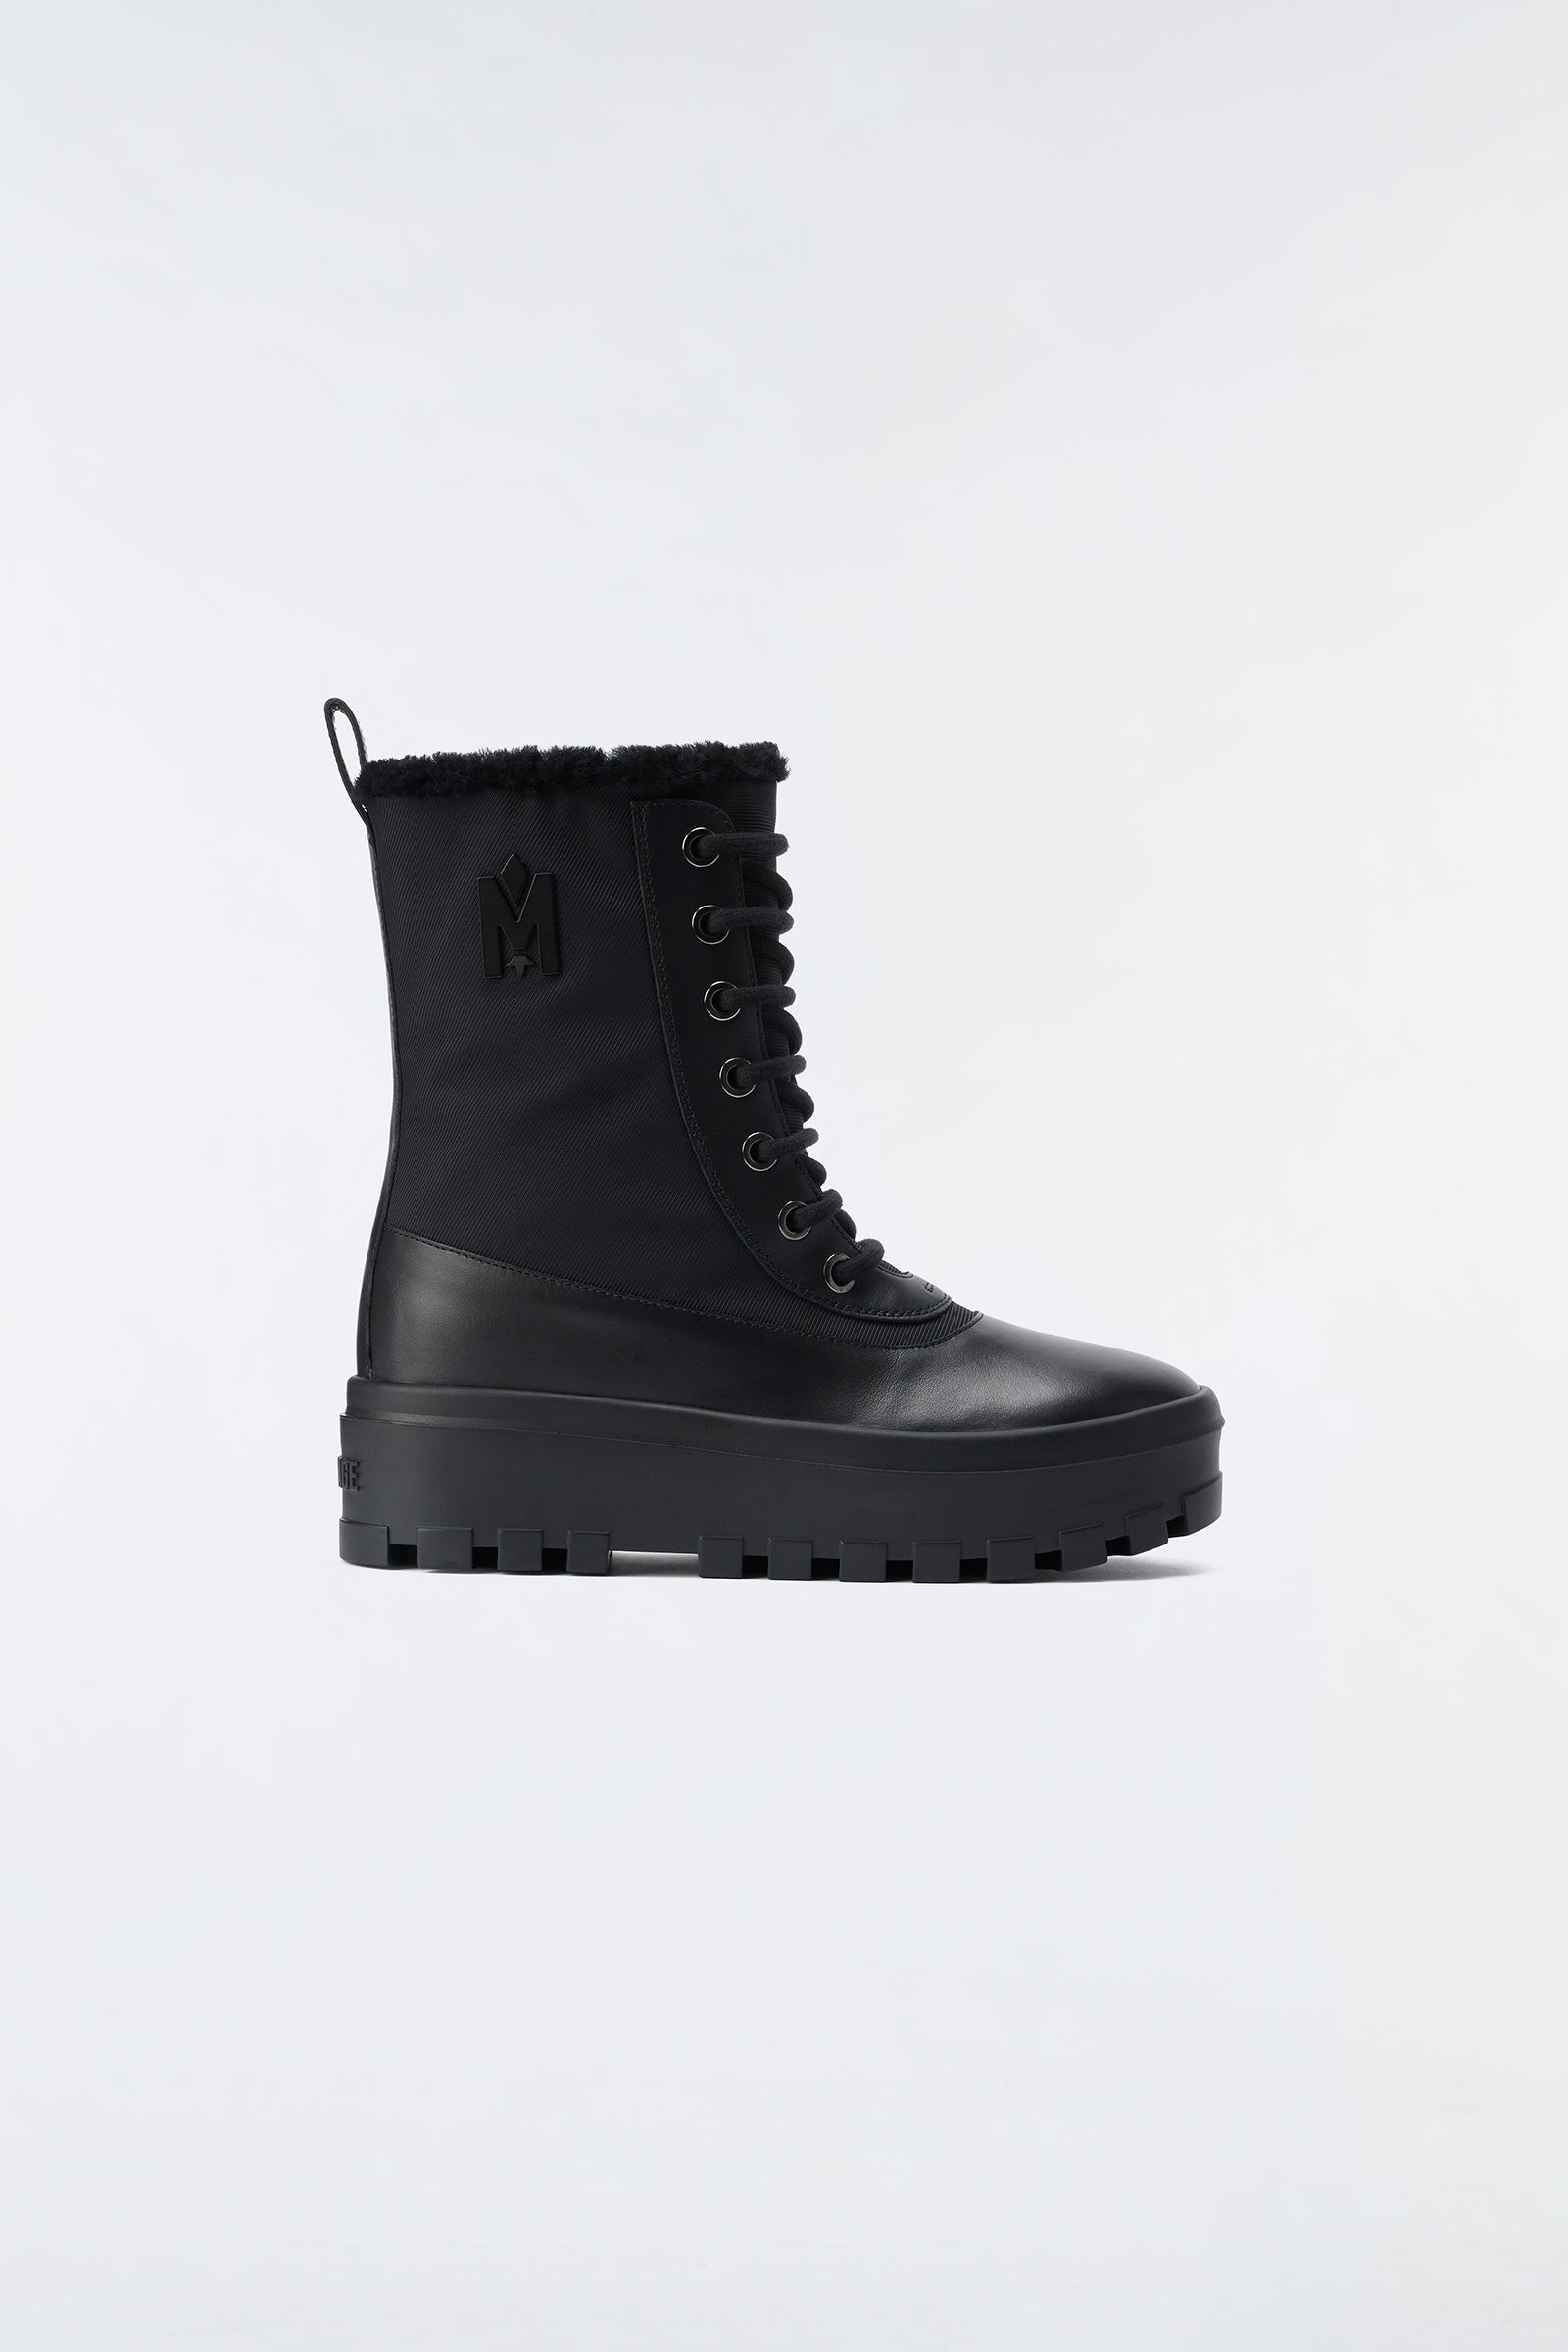 Hero, Shearling-lined winter boot for ladies | Mackage® US